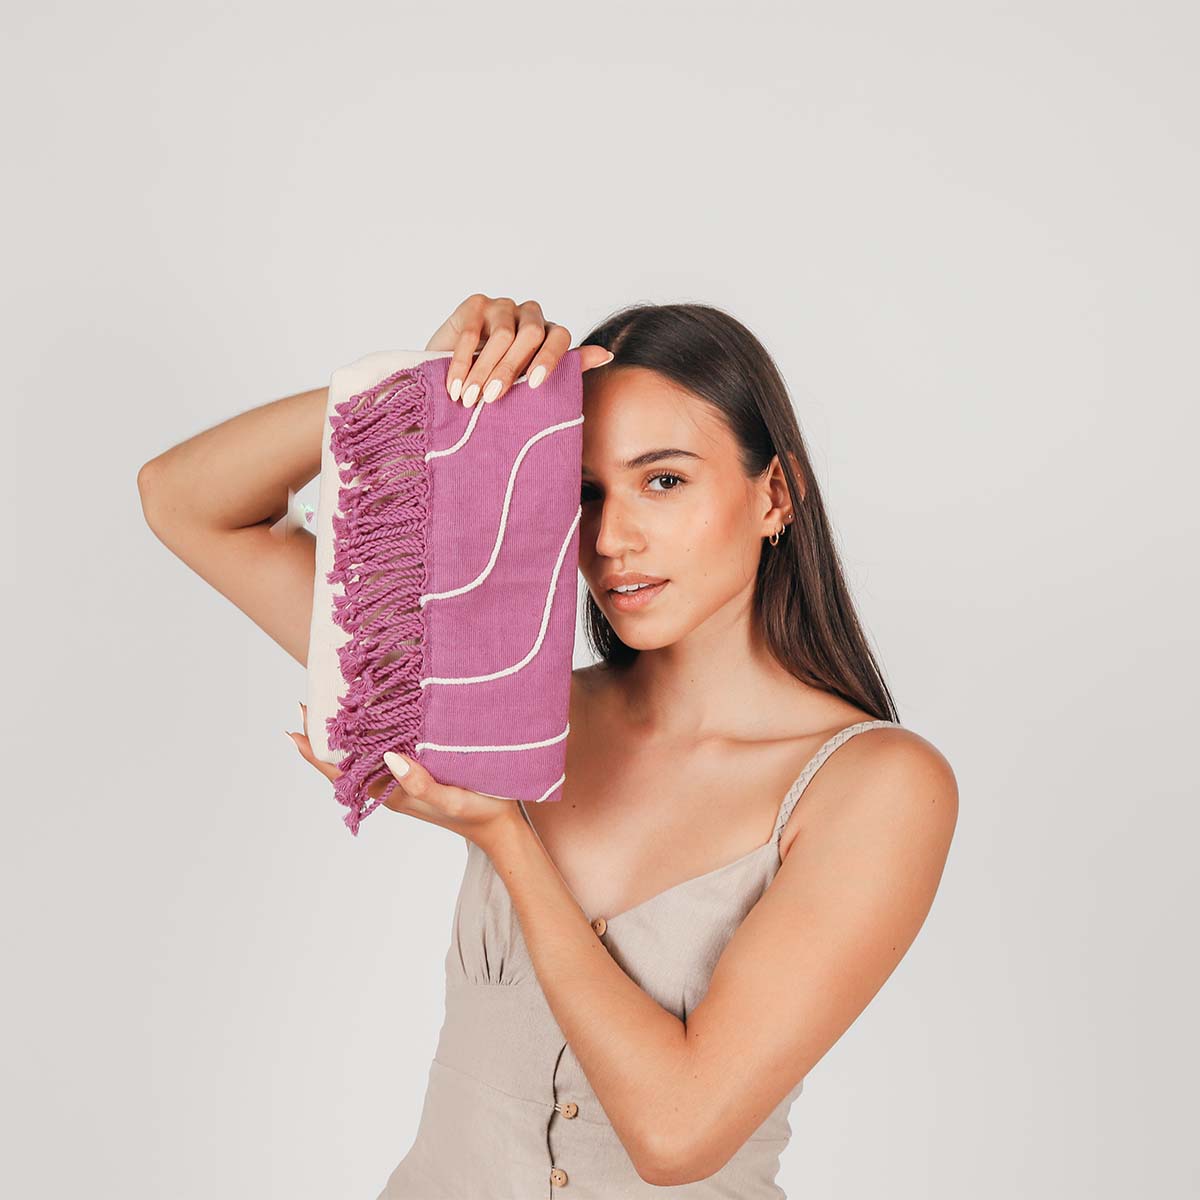 A model holds the hand woven artisan Margarita Clutch in Cosmic Waves, covering one side of her face.